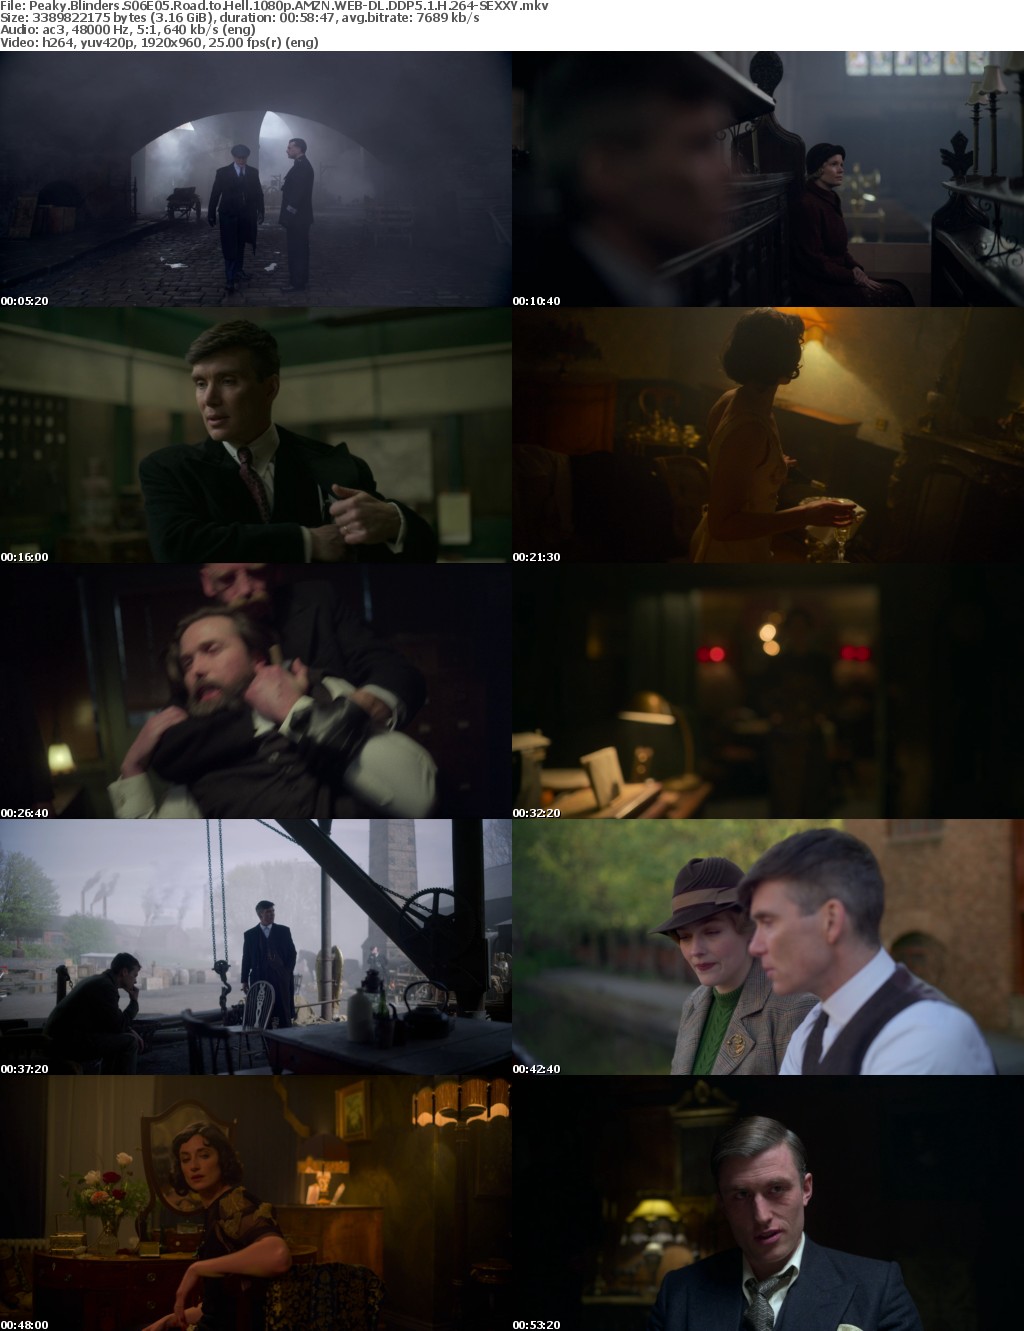 Peaky Blinders S06E05 Road to Hell 1080p AMZN WEB-DL DDP5 1 H 264-SEXXY